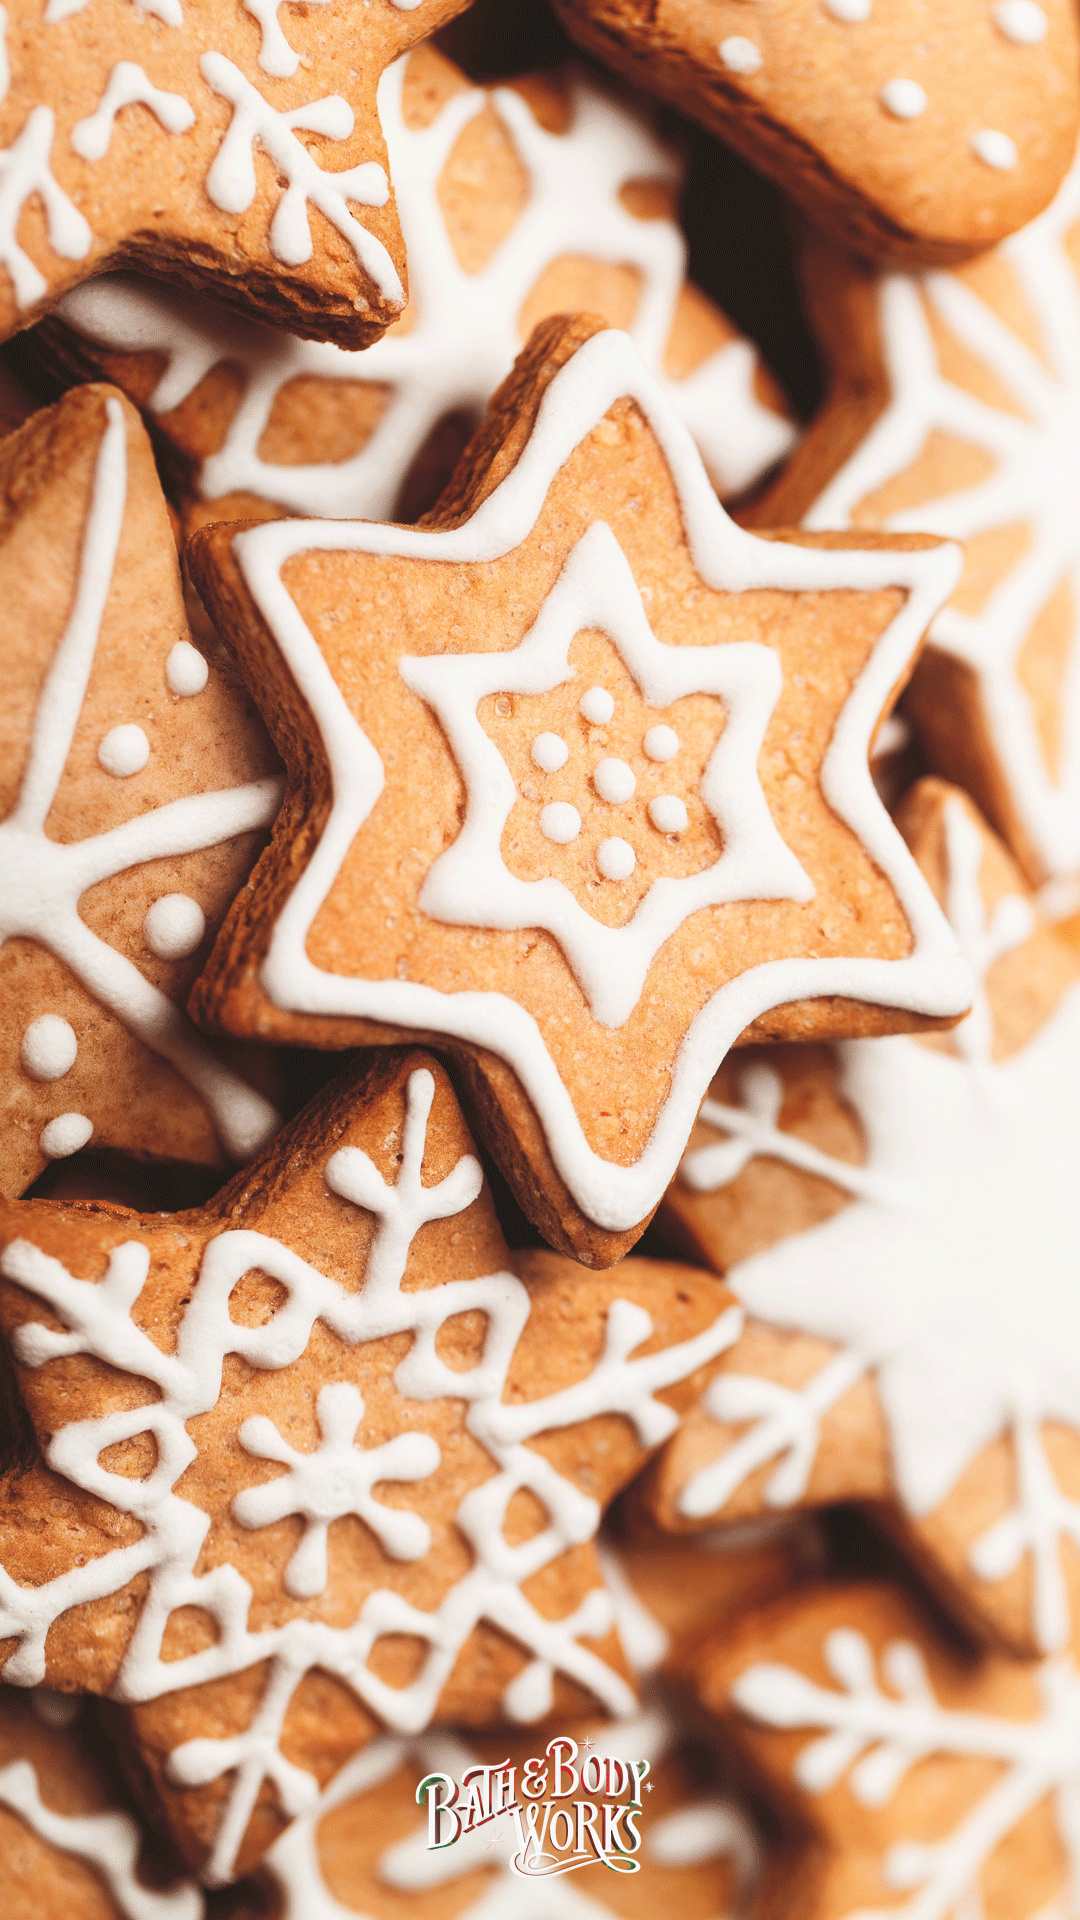 Biscuit: Gingerbread, Baked goods, typically flavored with ginger, cloves, nutmeg. 1080x1920 Full HD Wallpaper.